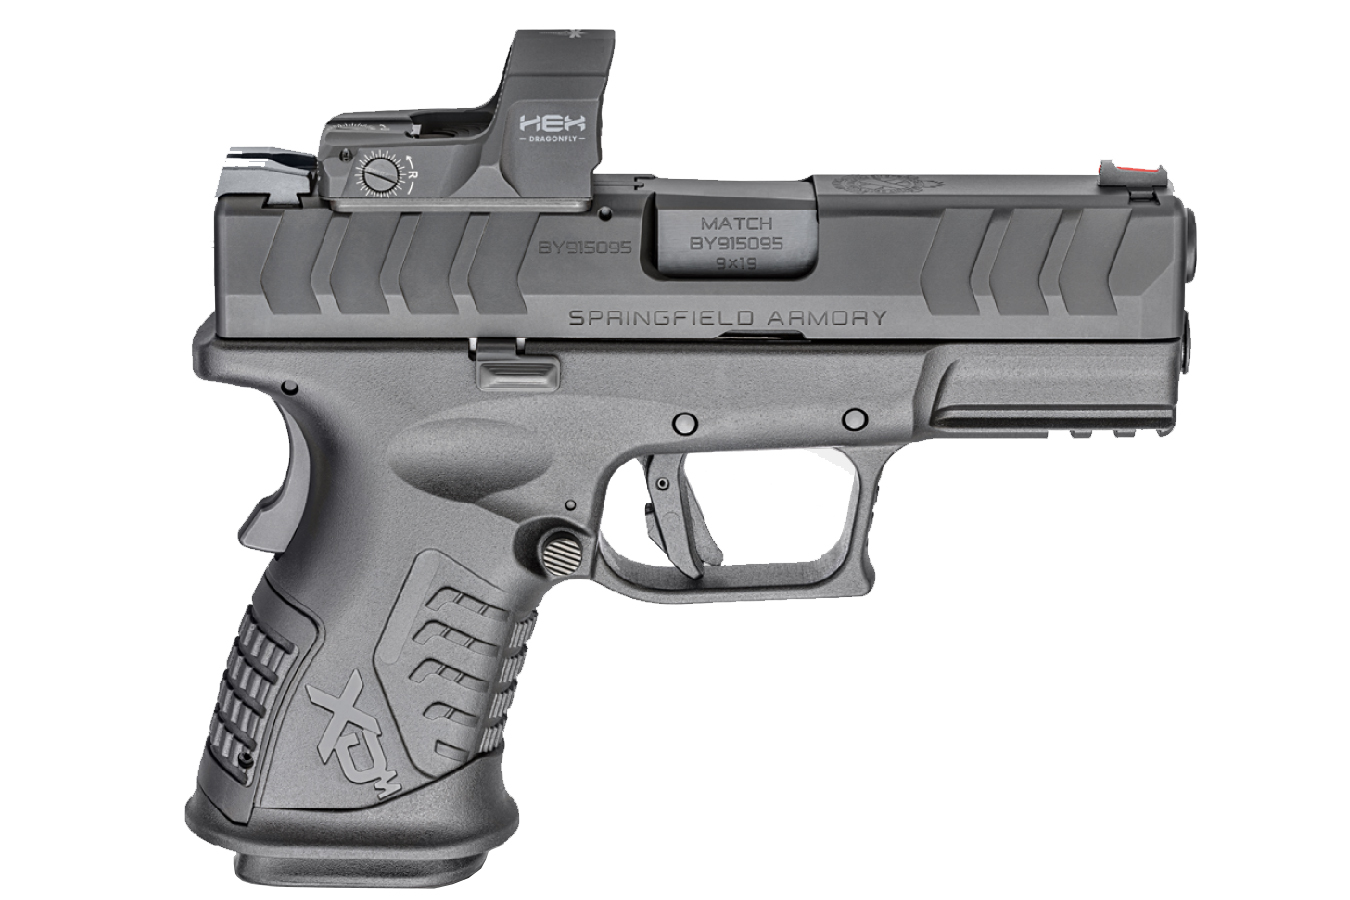 SPRINGFIELD XDM ELITE 3.8 OSP COMPACT 9MM PISTOL WITH HEX DRAGONFLY RED DOT (LE)